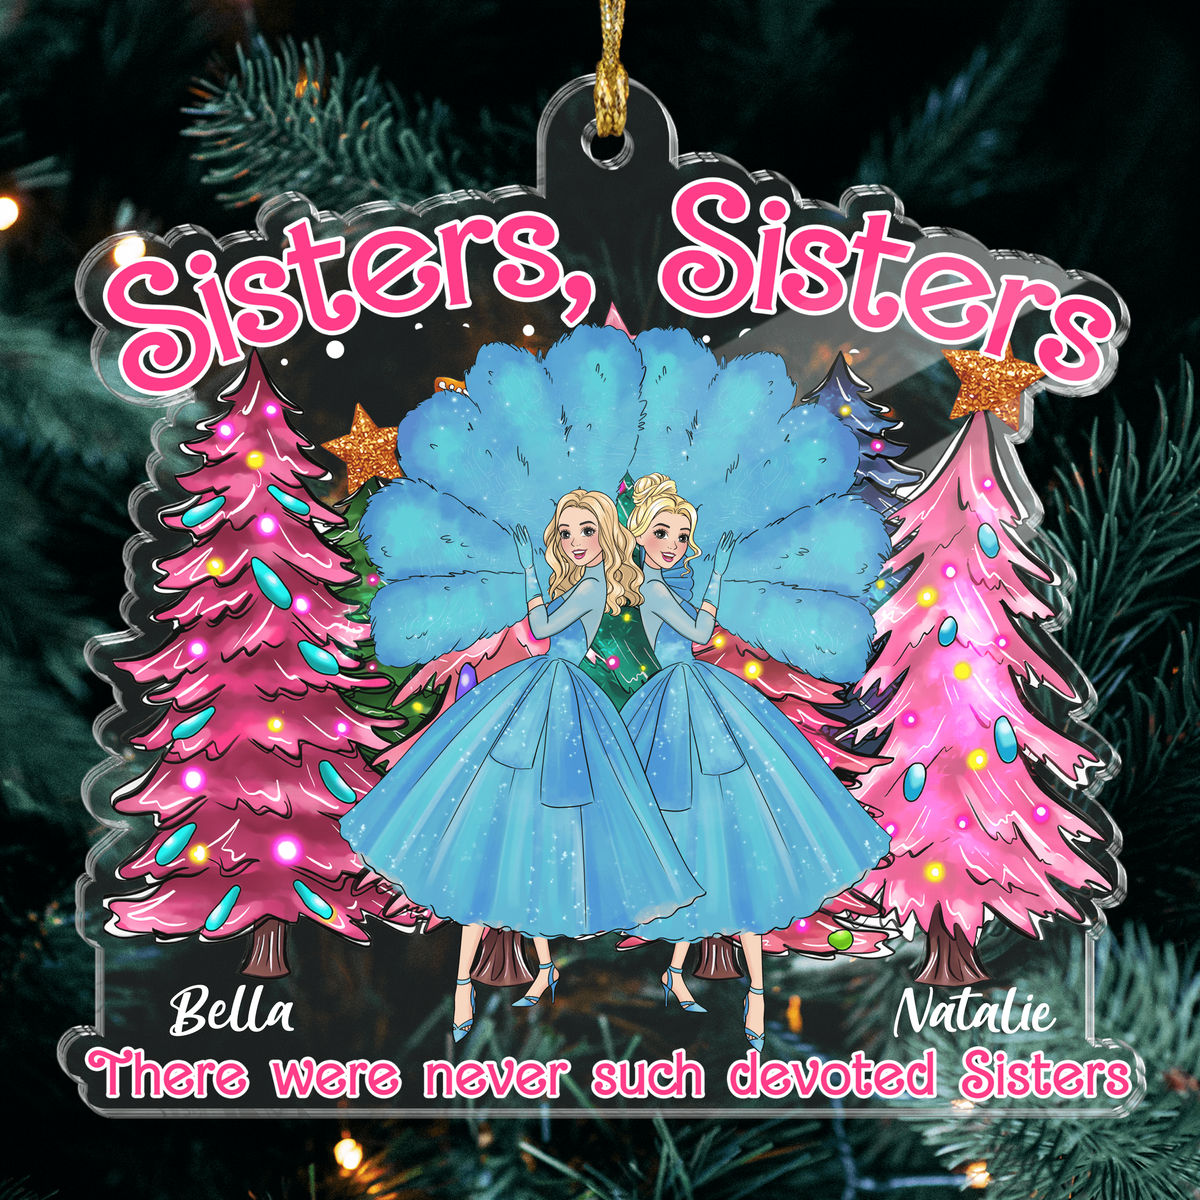 Personalized Ornament - Sisters Sisters Vintage (58019)